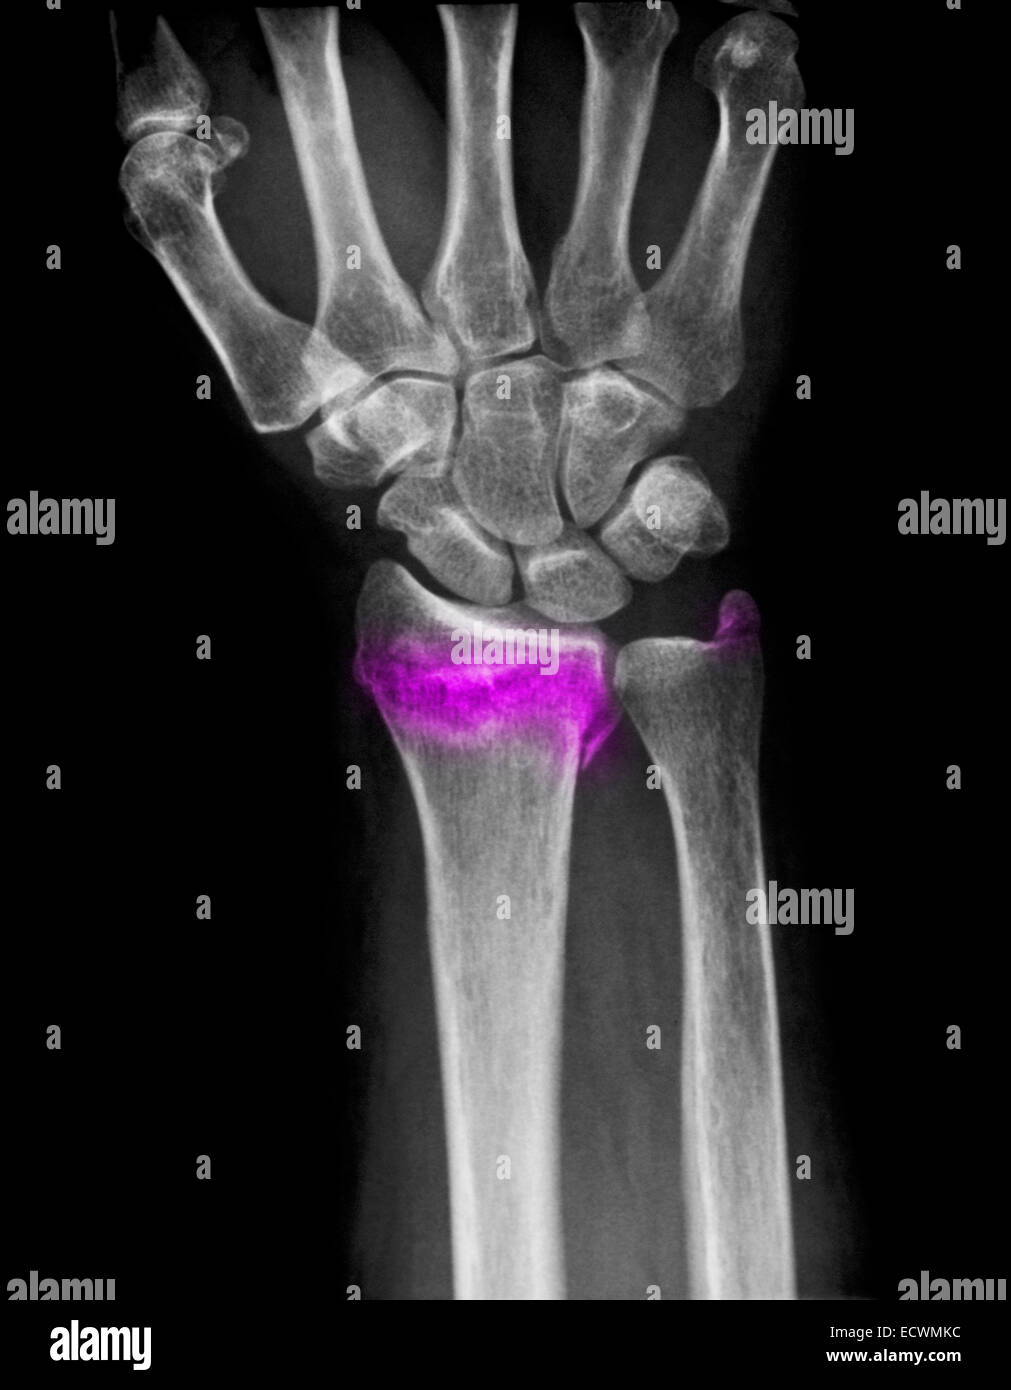 Wrist x-ray showing a fractured distal radius and ulna. Stock Photo